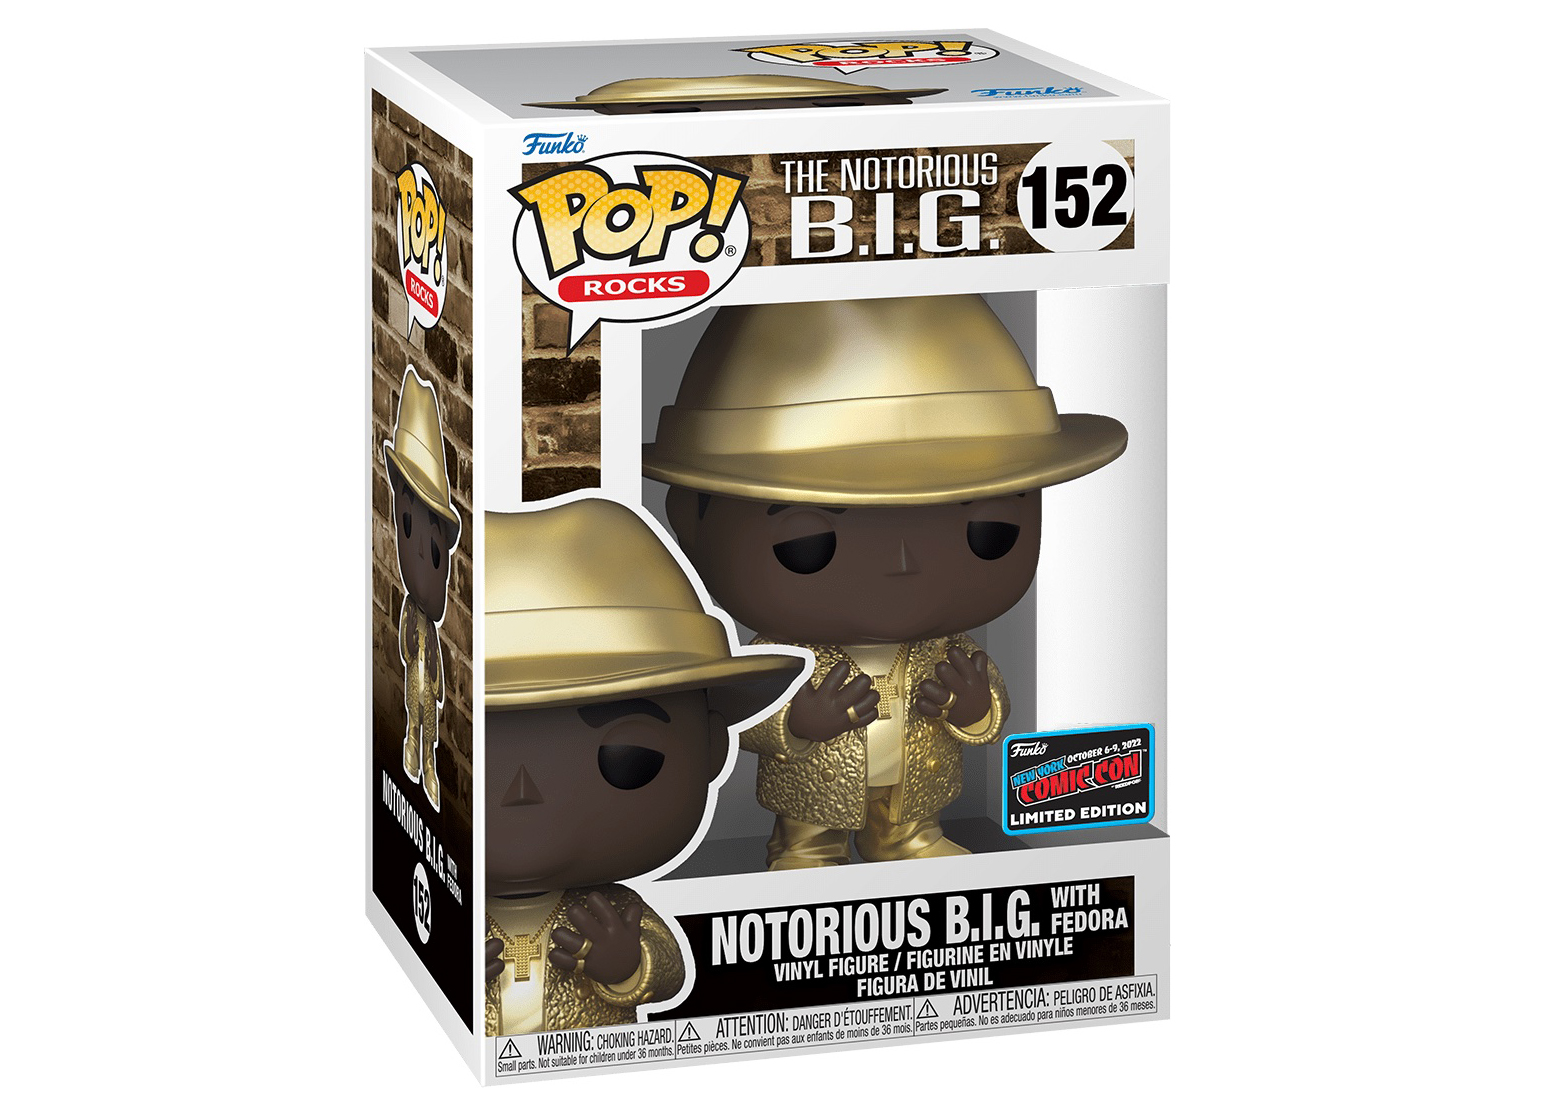 Funko Pop! Rocks The Notorious B.I.G. (Notorious B.I.G. with 